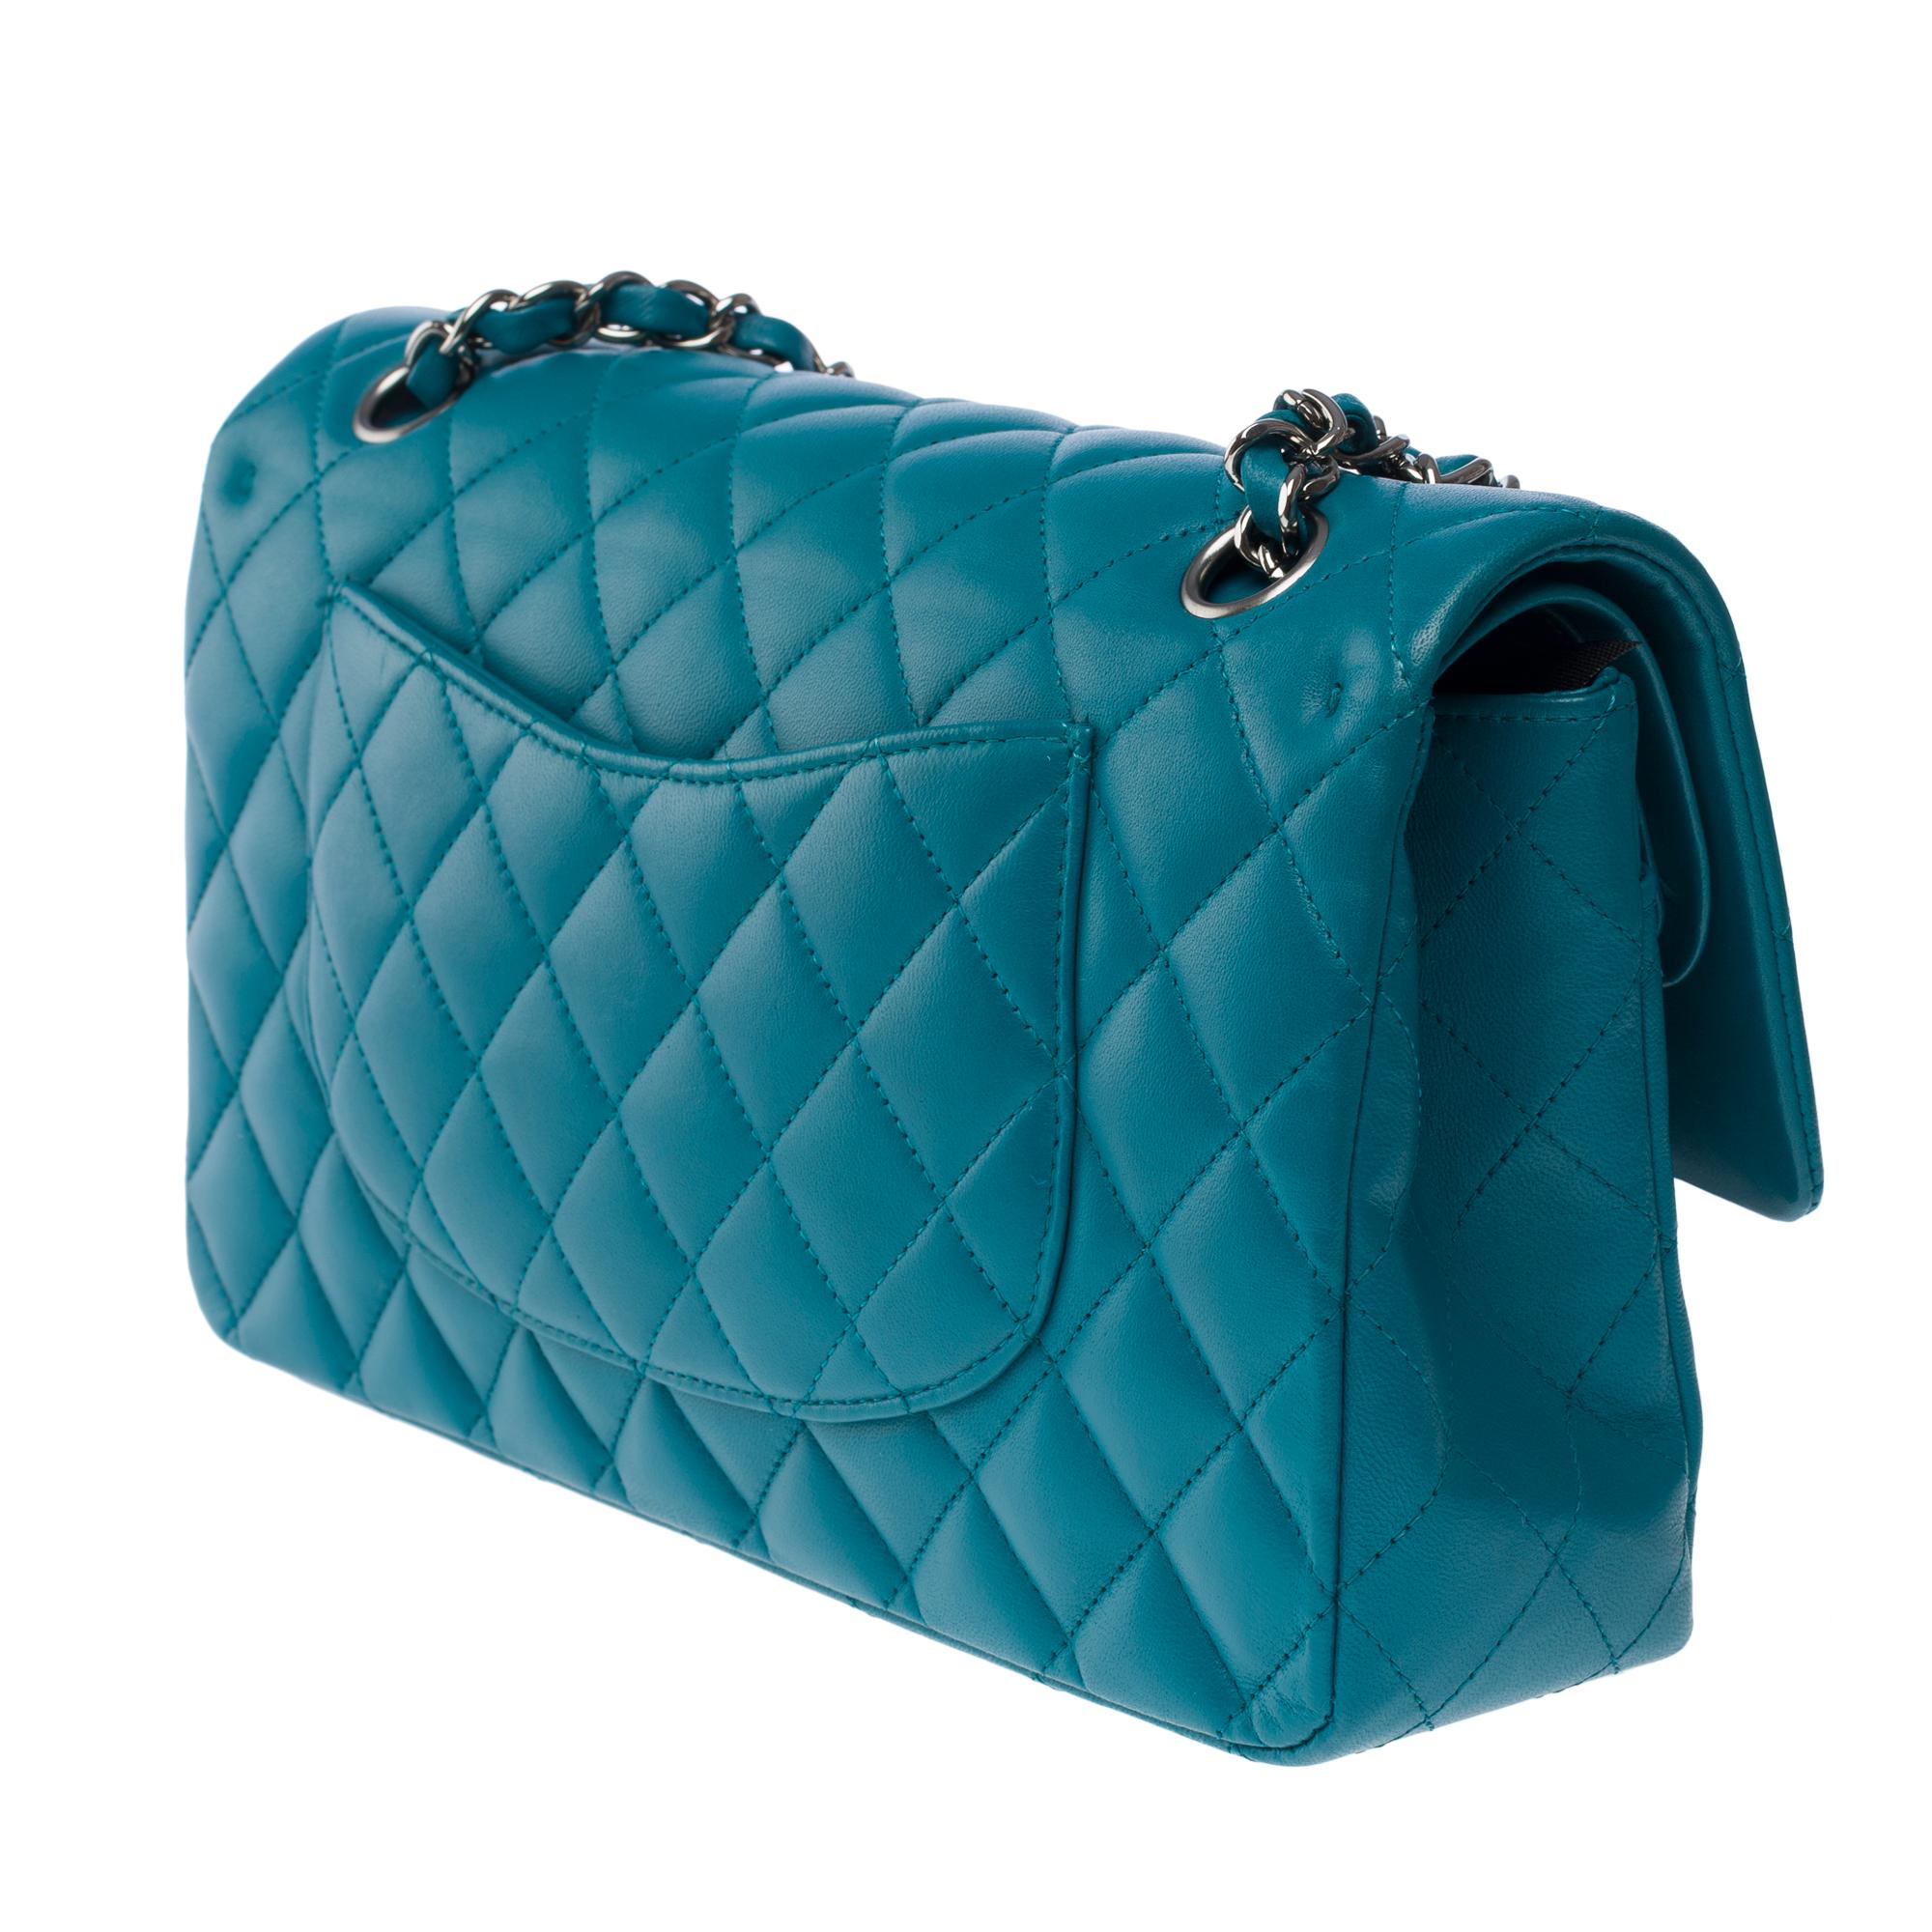 Chanel Timeless double flap shoulder bag in Turquoise quilted lamb leather, BSHW For Sale 2